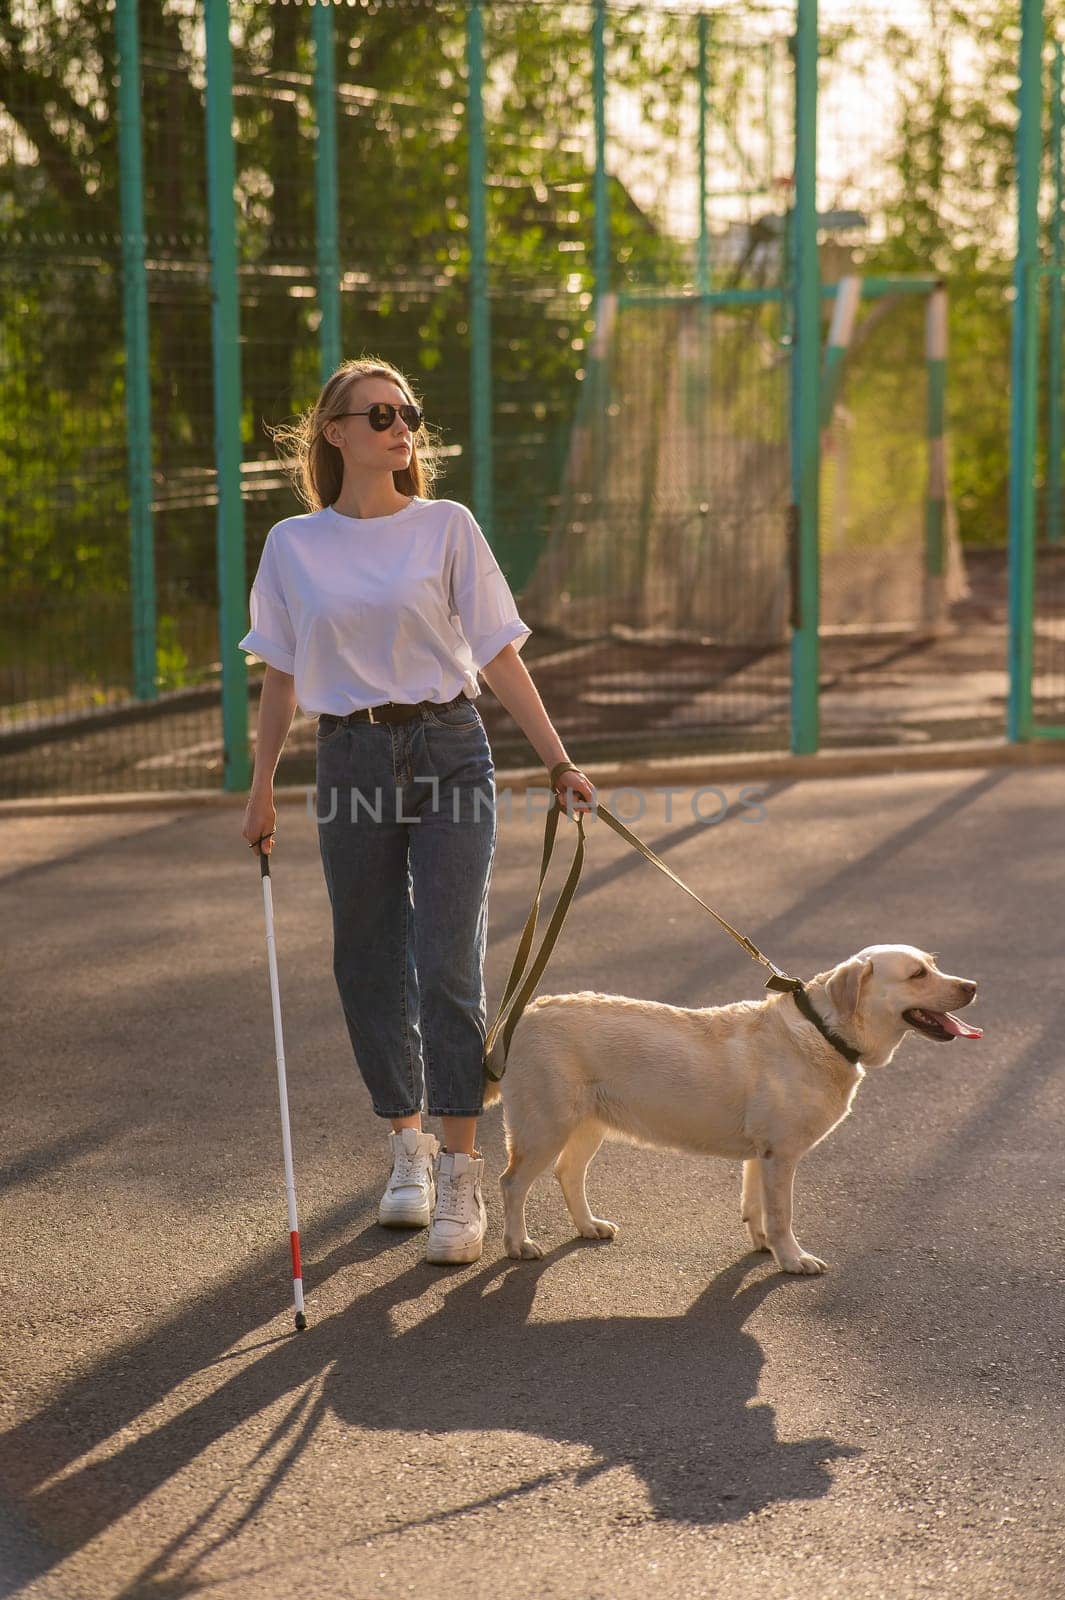 Blind woman walking with guide dog